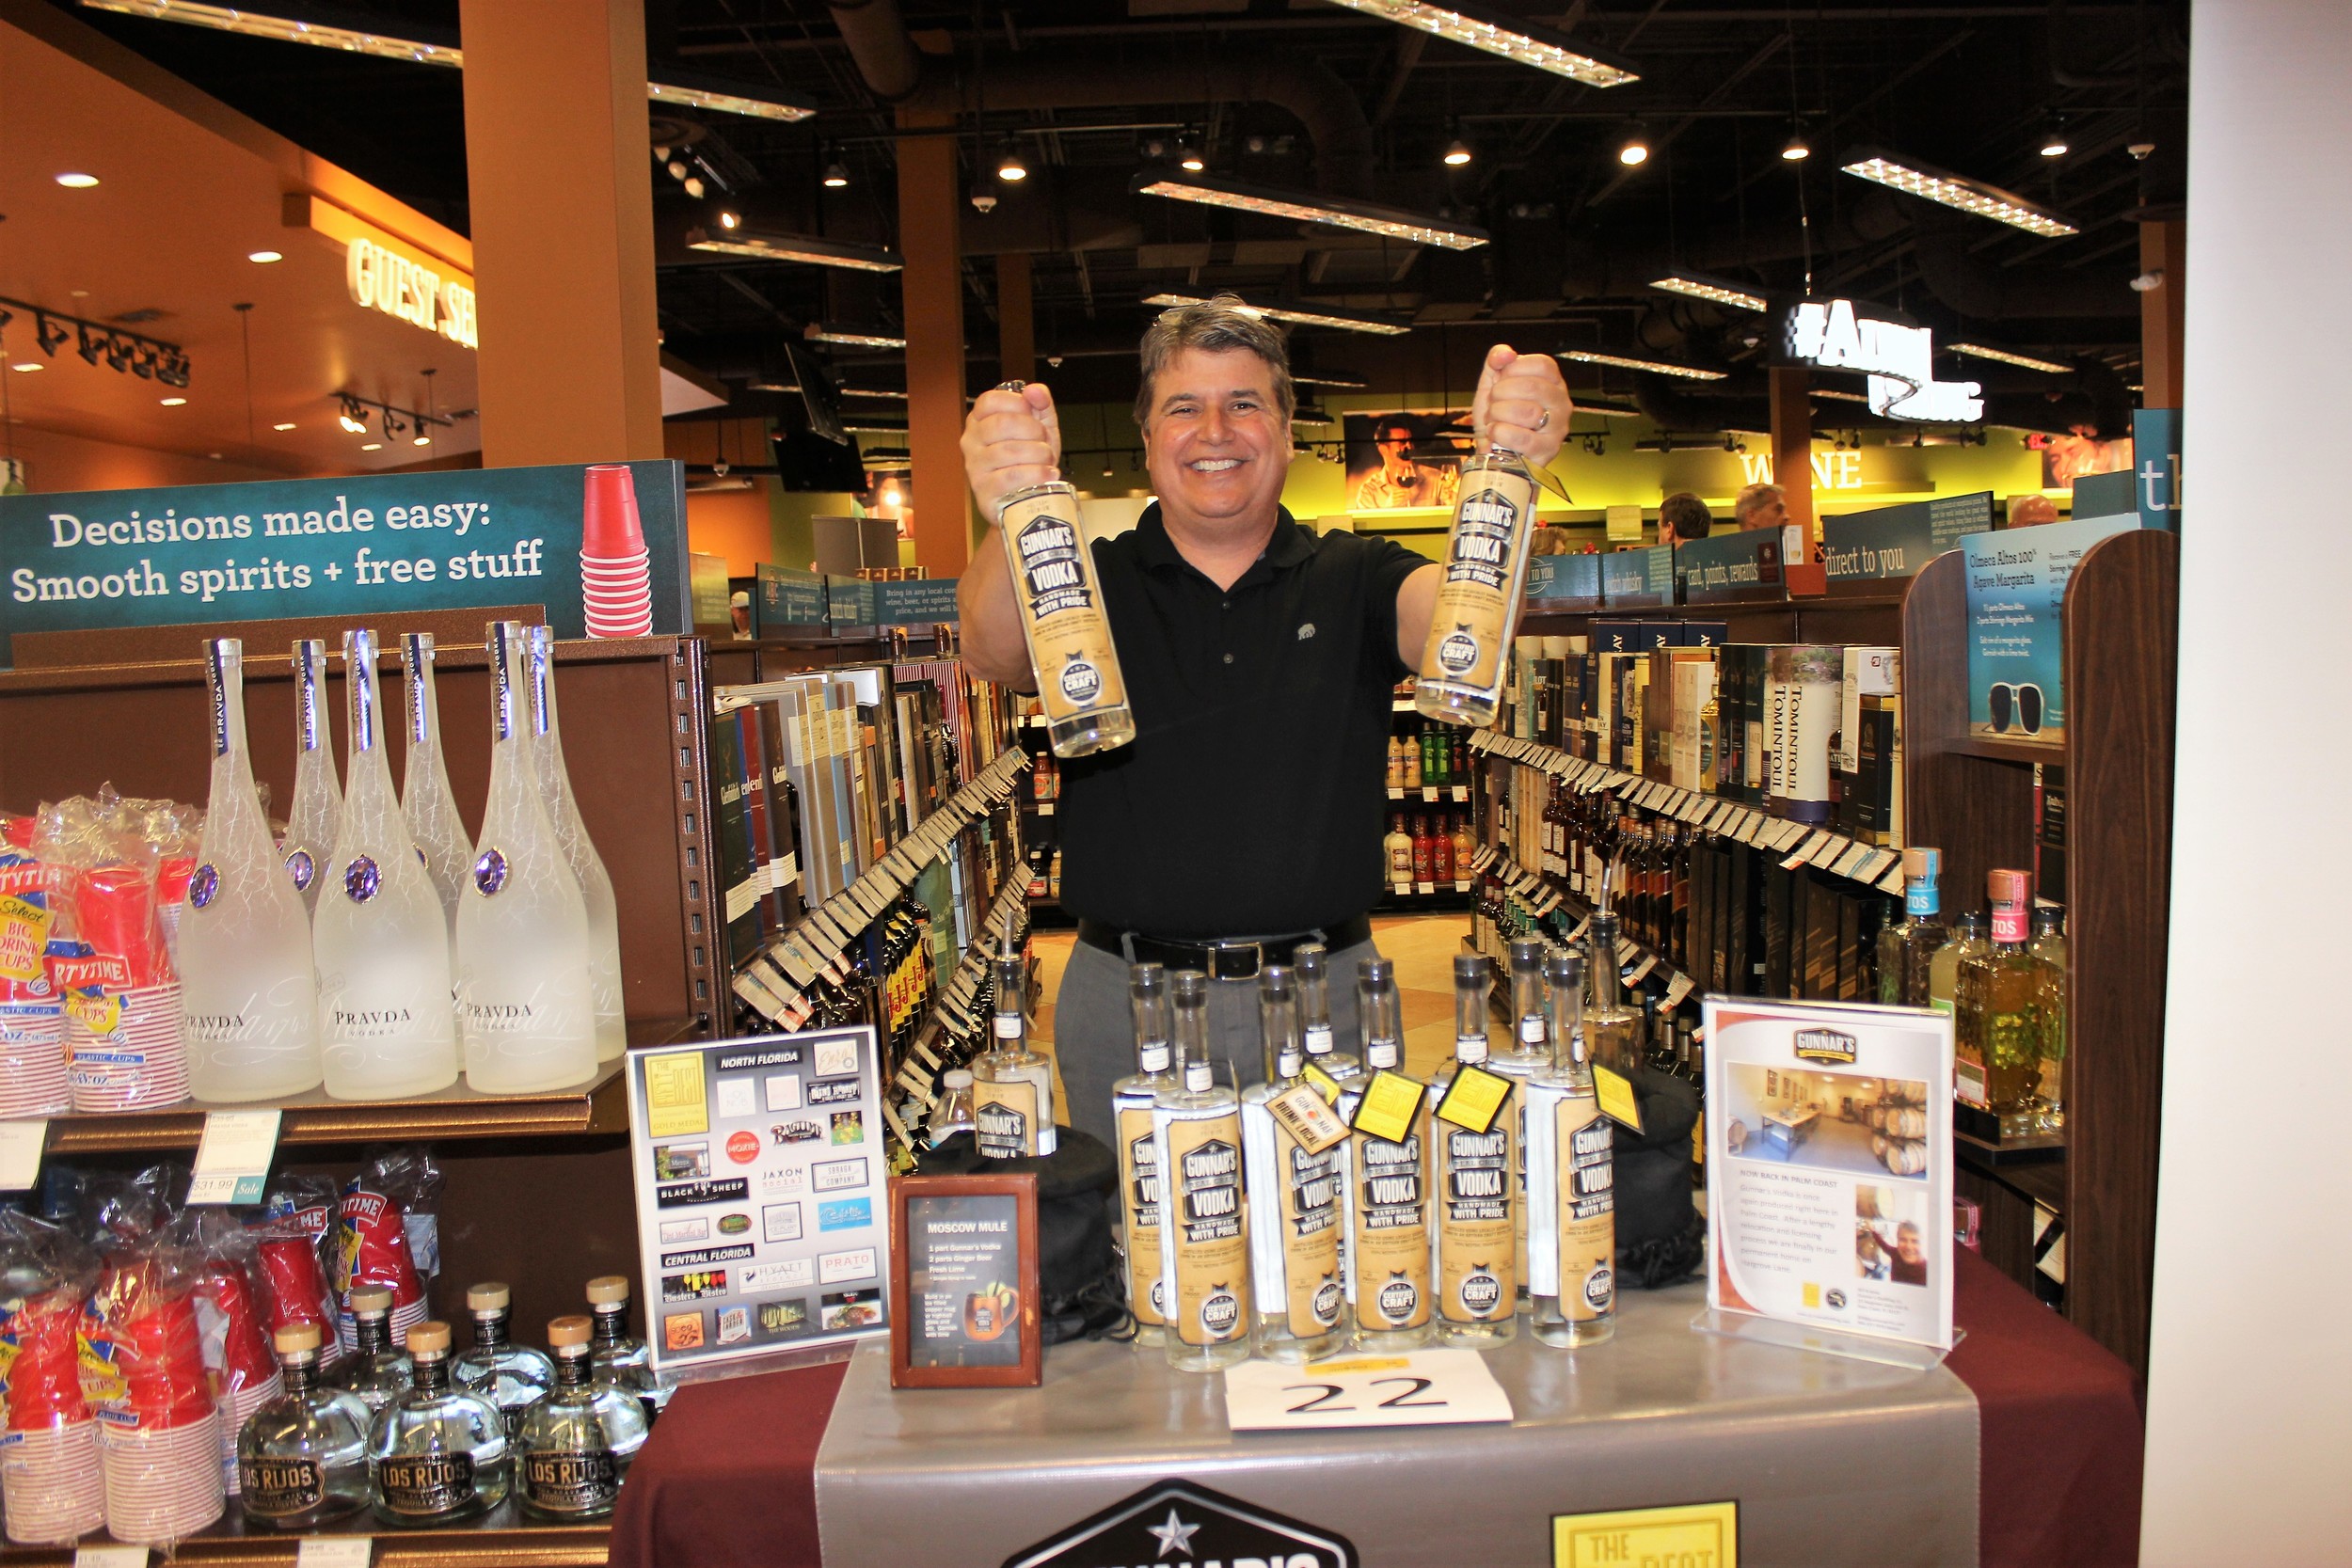 Gunnar’s Distilling Company of Palm Coast was among the vendors participating in the event.